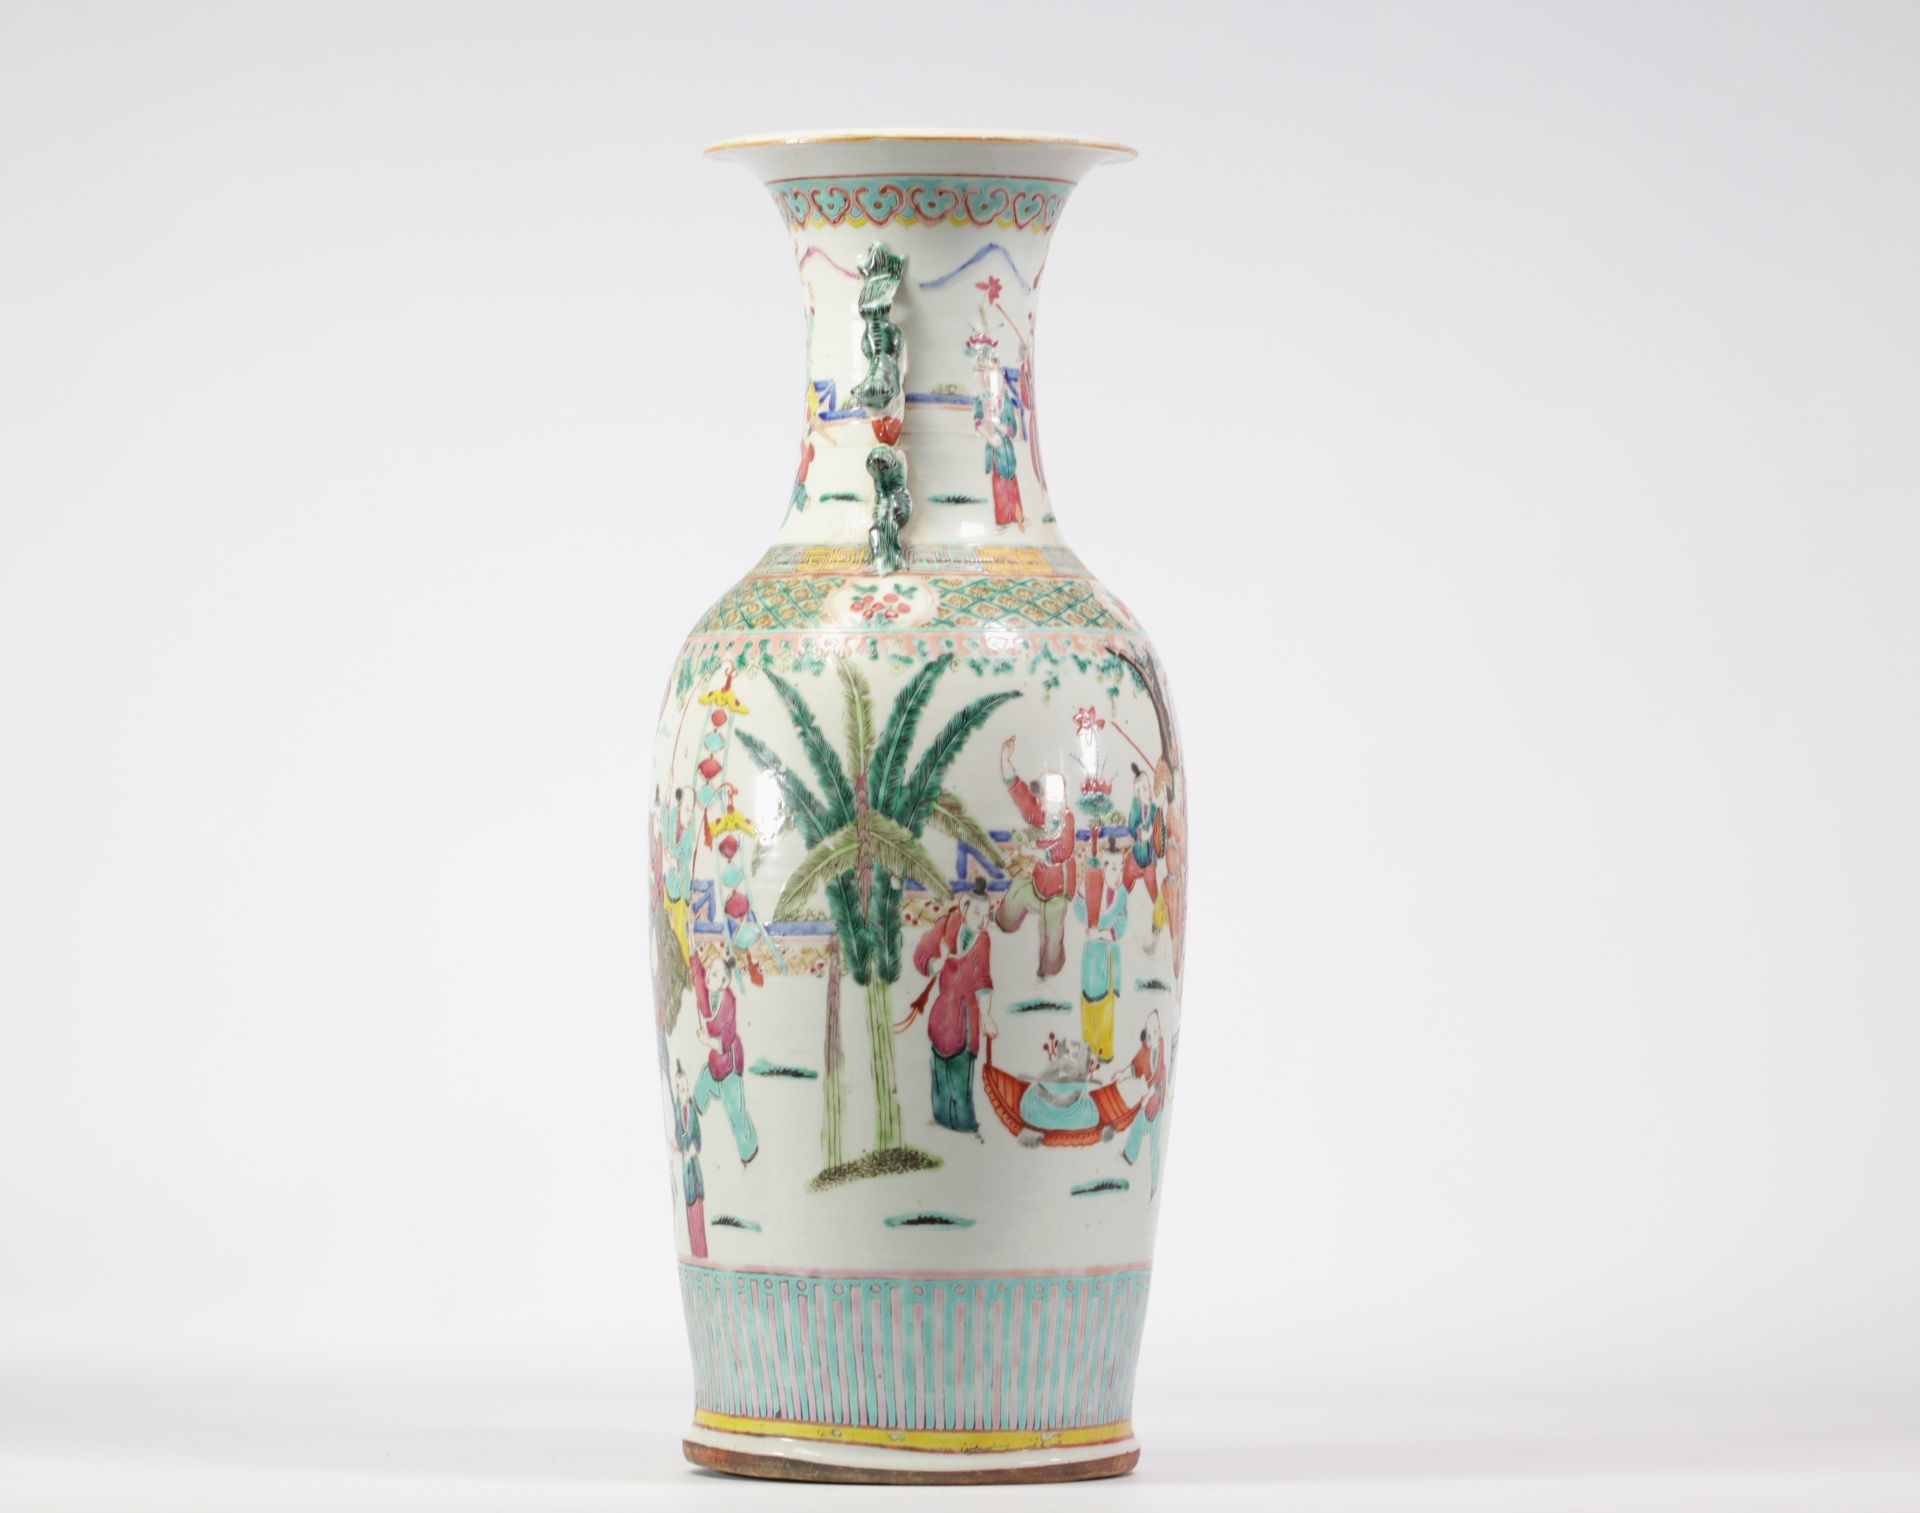 Large porcelain vase, famille rose, decorated with characters 19th century - Image 2 of 5